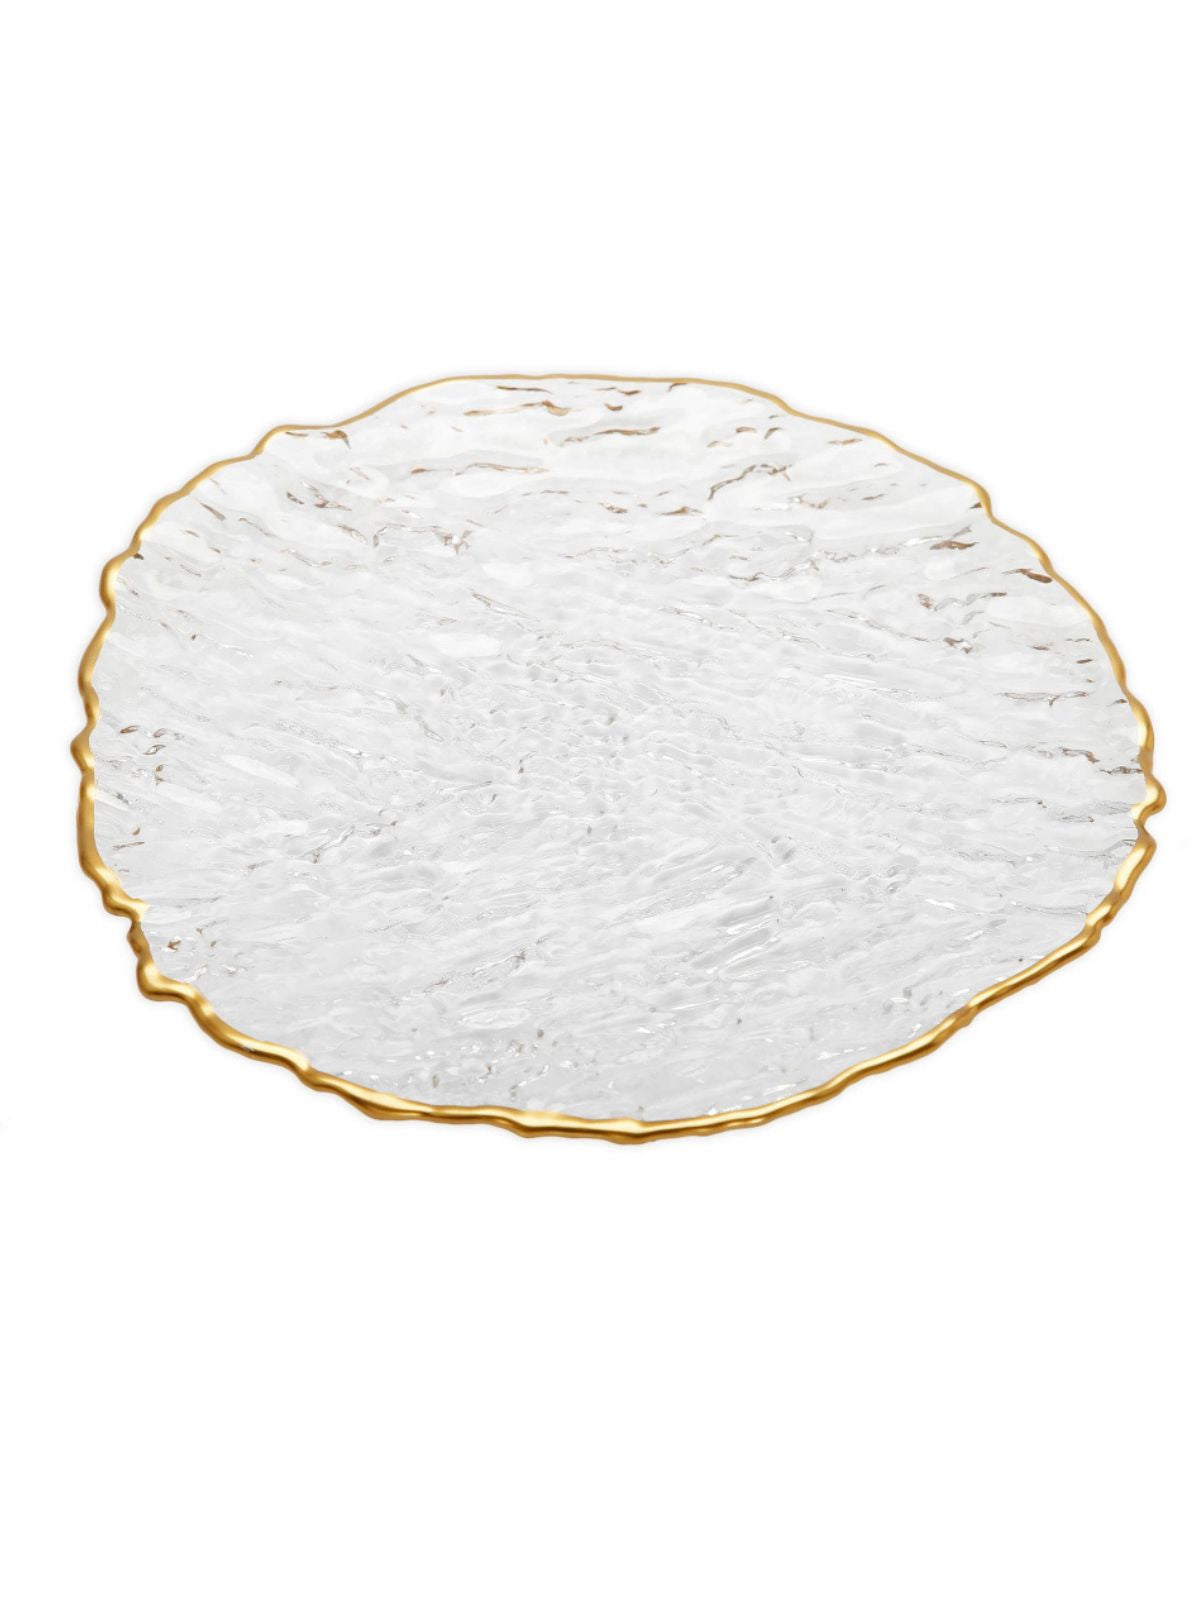 This set of 4 dinner plates features beautiful textured glass and a delicate gold trim to add to your serving experience! 